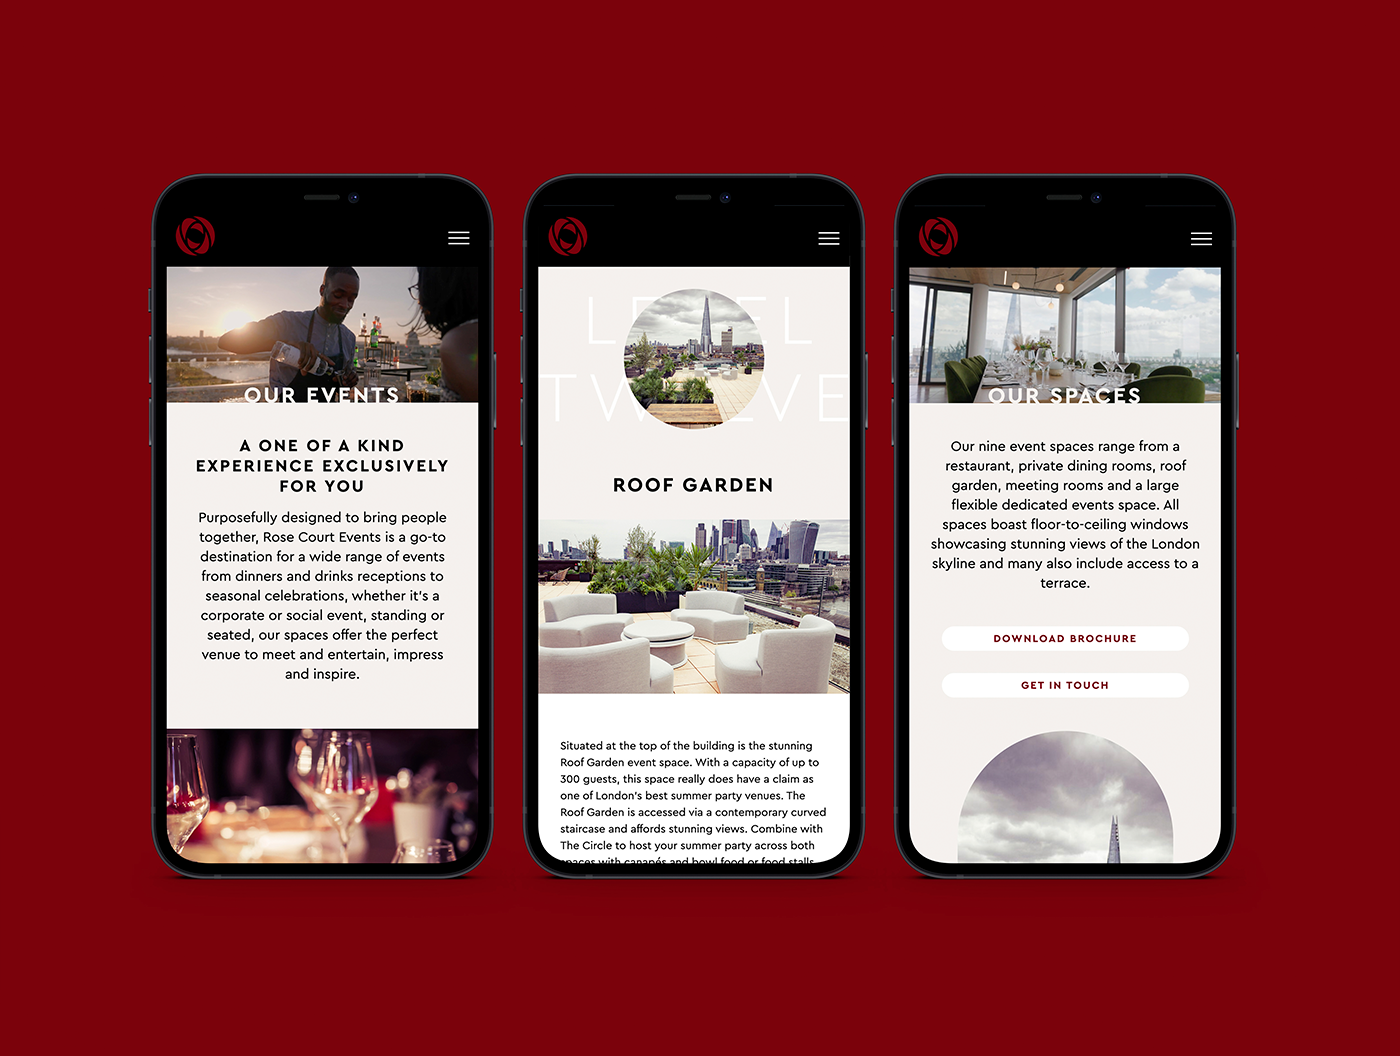 Rose Court Events website on mobile phone